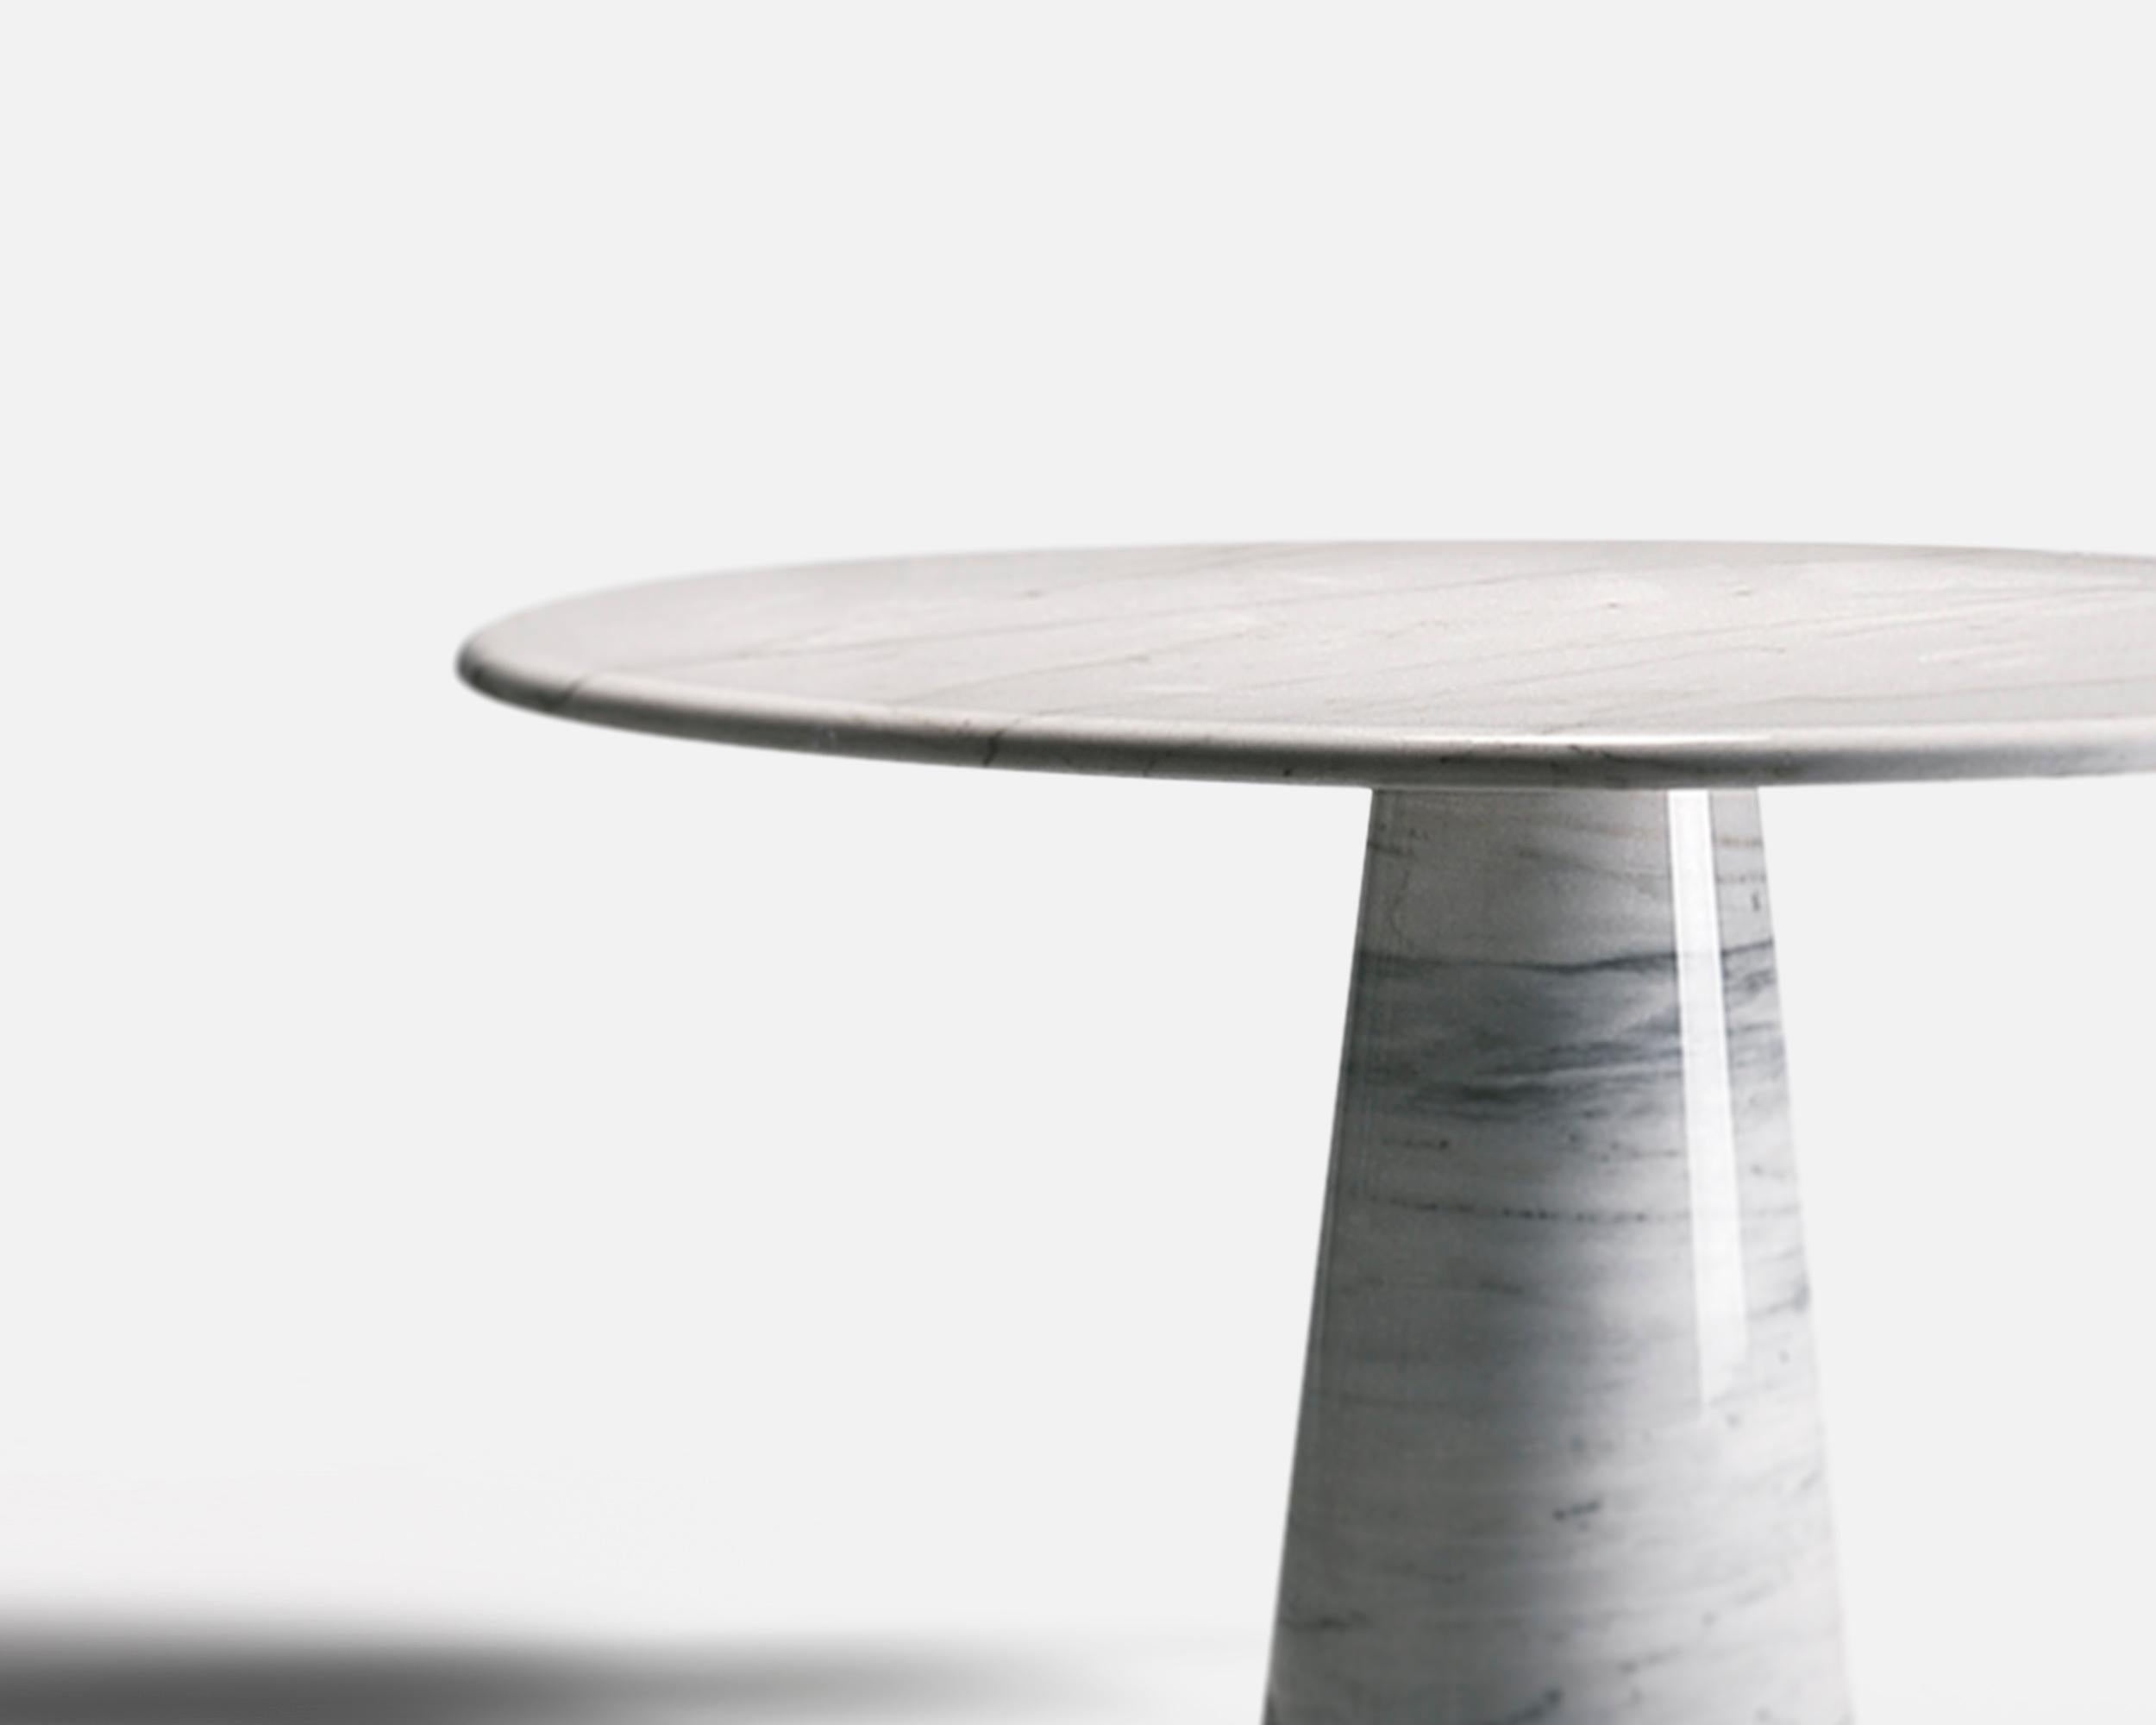 'Colonnata' round dining table in silver travertine
Design by Pier Alessandro Giusti & Egidio Di Rosa.
1970s

Dimensions: H. 72cm, D. 110cm
Material: marble, travertine, (wide range of stone types available)

Customization: 
This table is still